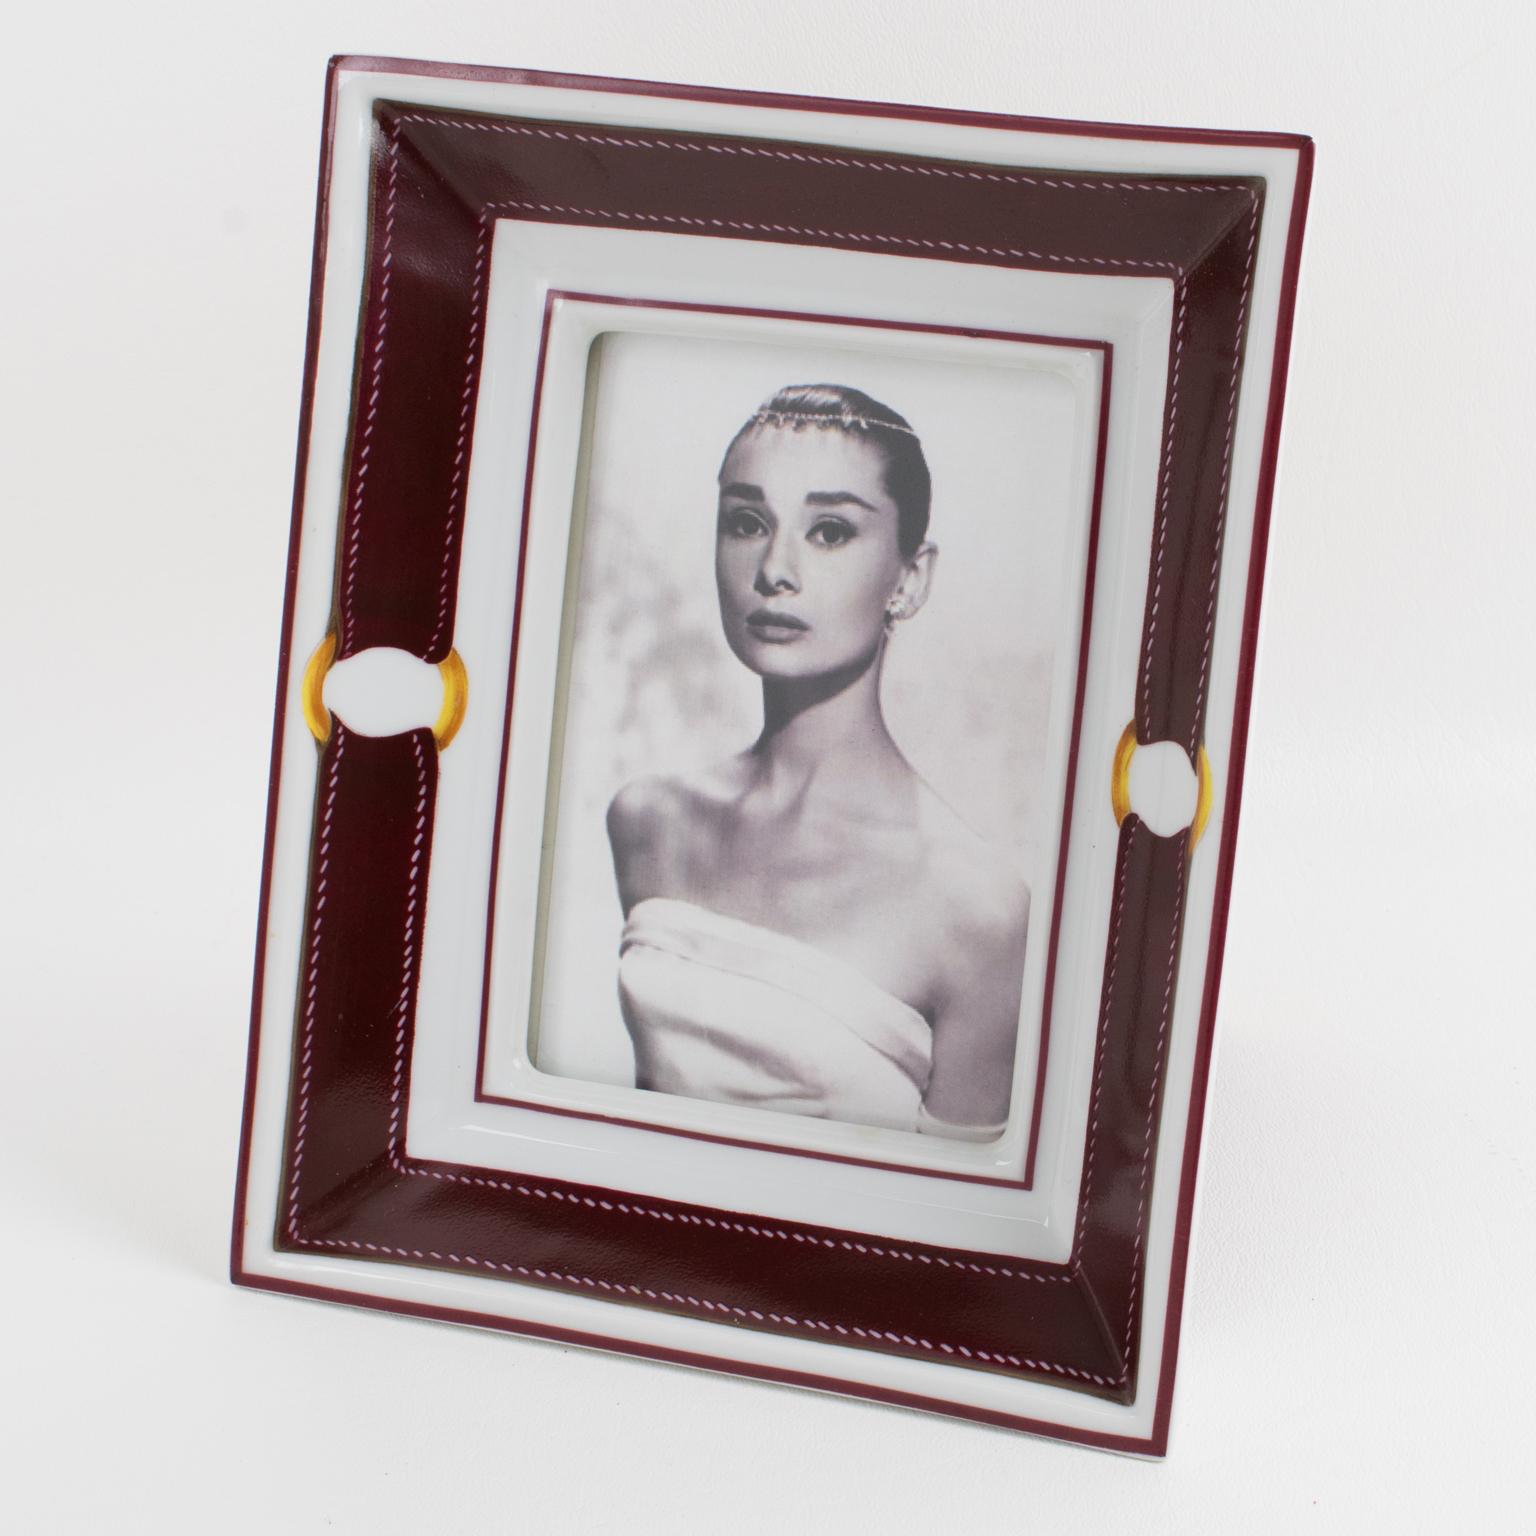 Hermes, Paris designs this superb and rare picture photo frame. Exclusively made for Hermes in Limoges, this timeless and elegant white porcelain picture frame is hand-decorated with Hermes' iconic buckle and strap in burgundy red and gold colors.